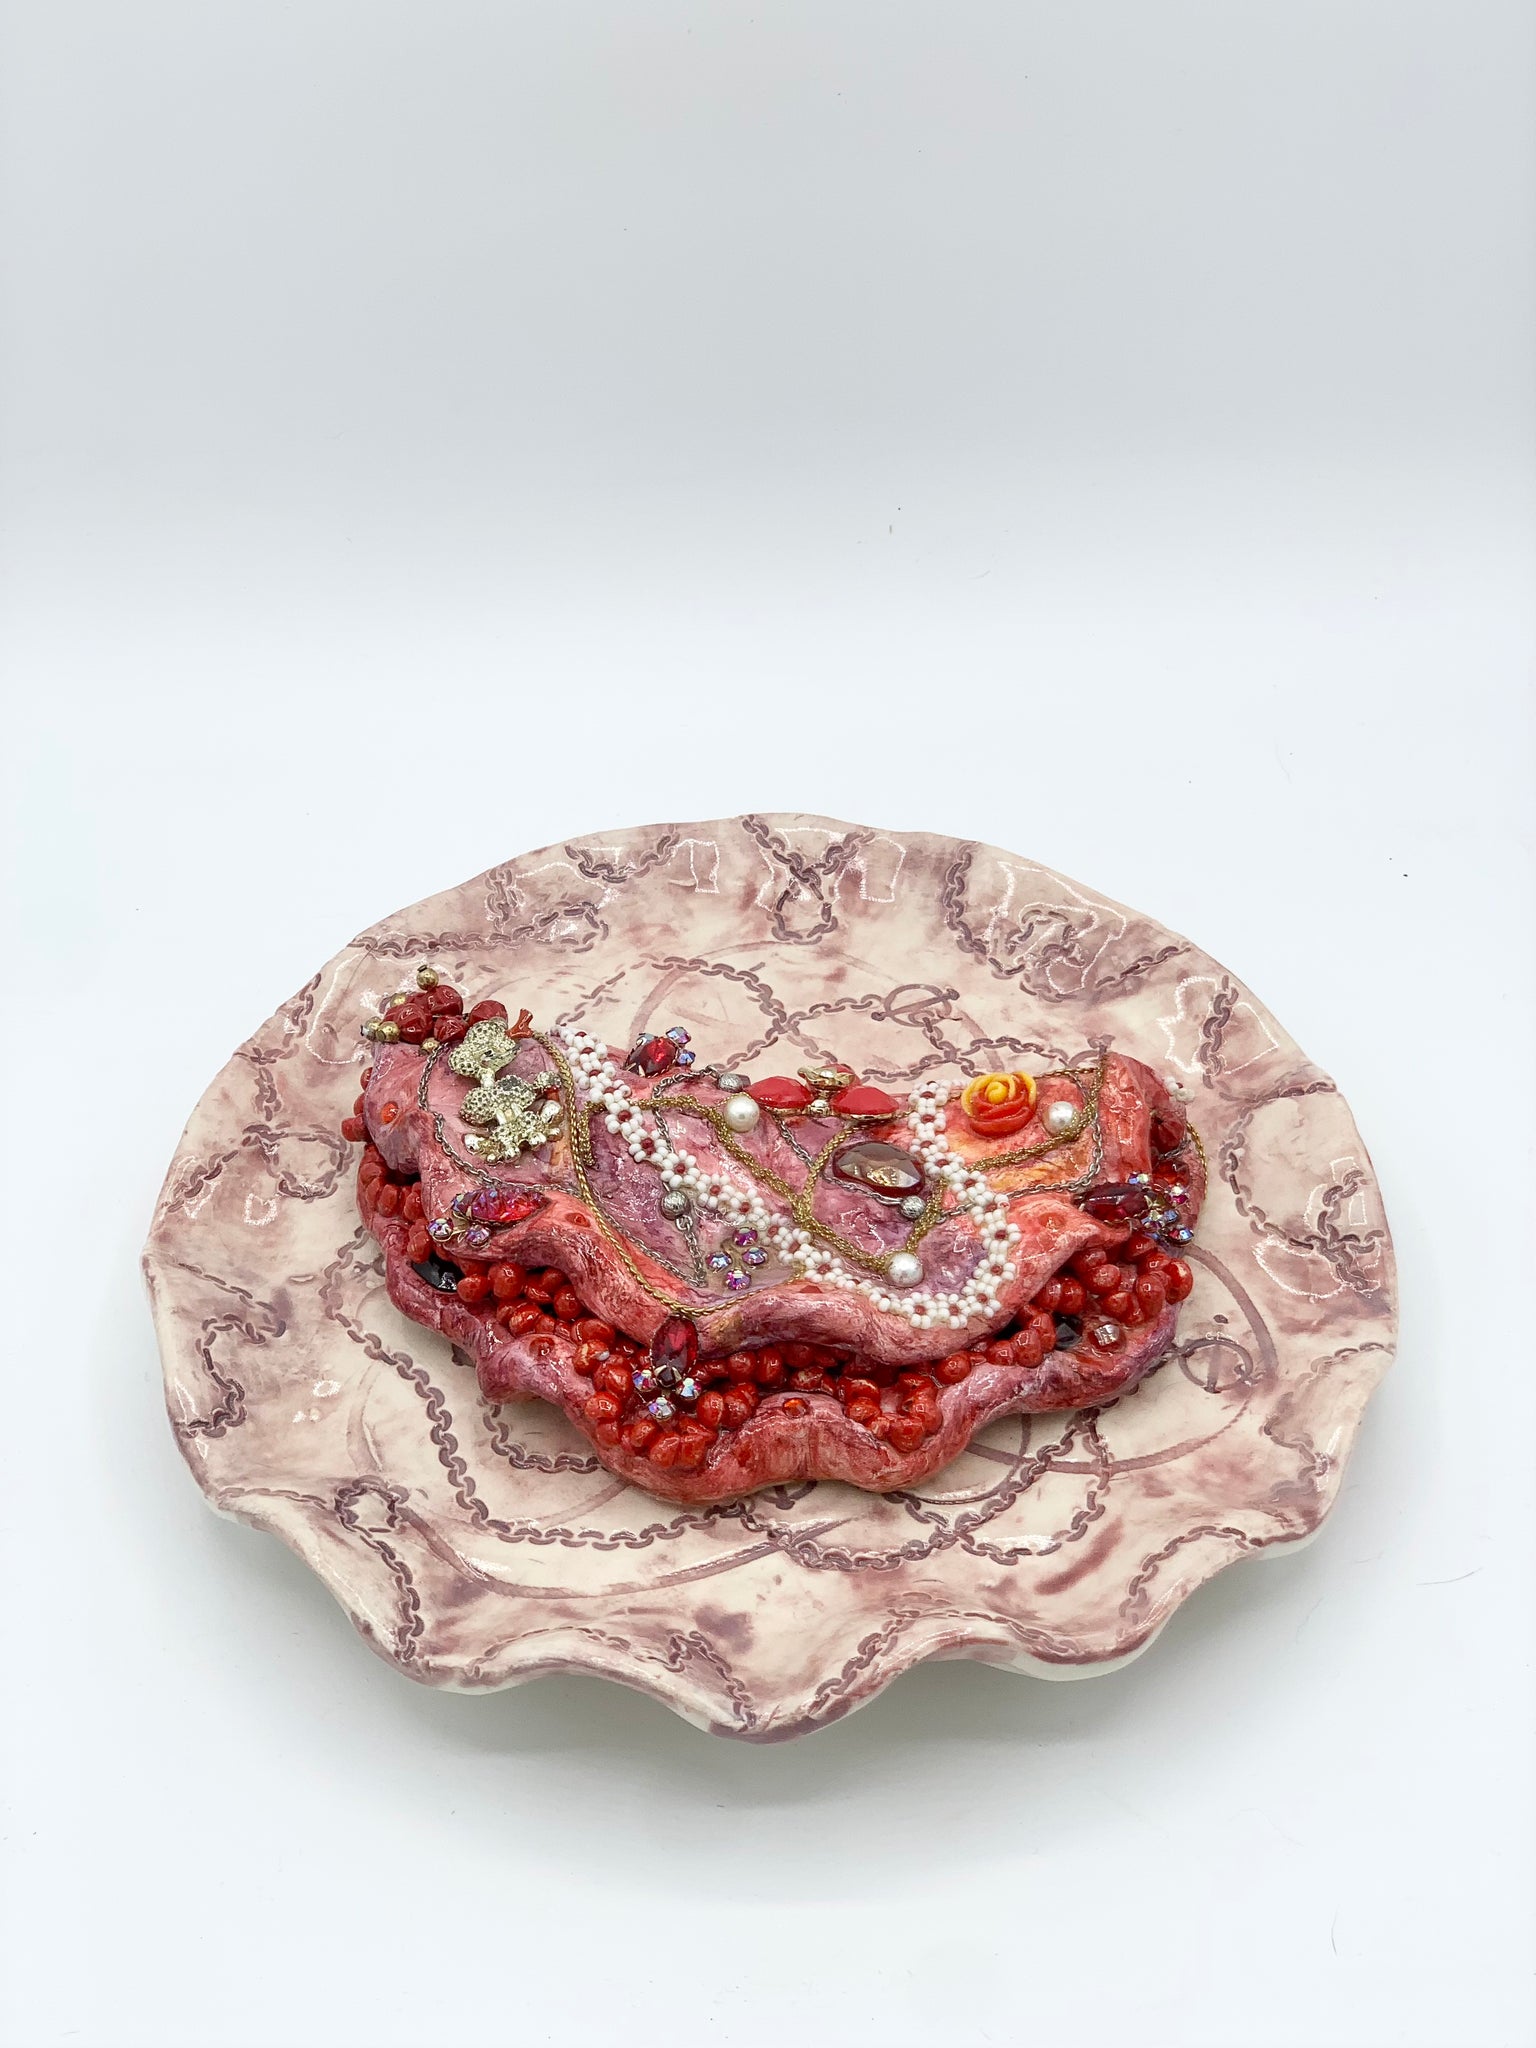 Mary Gagler, "Fabergé Omelet (Red)"